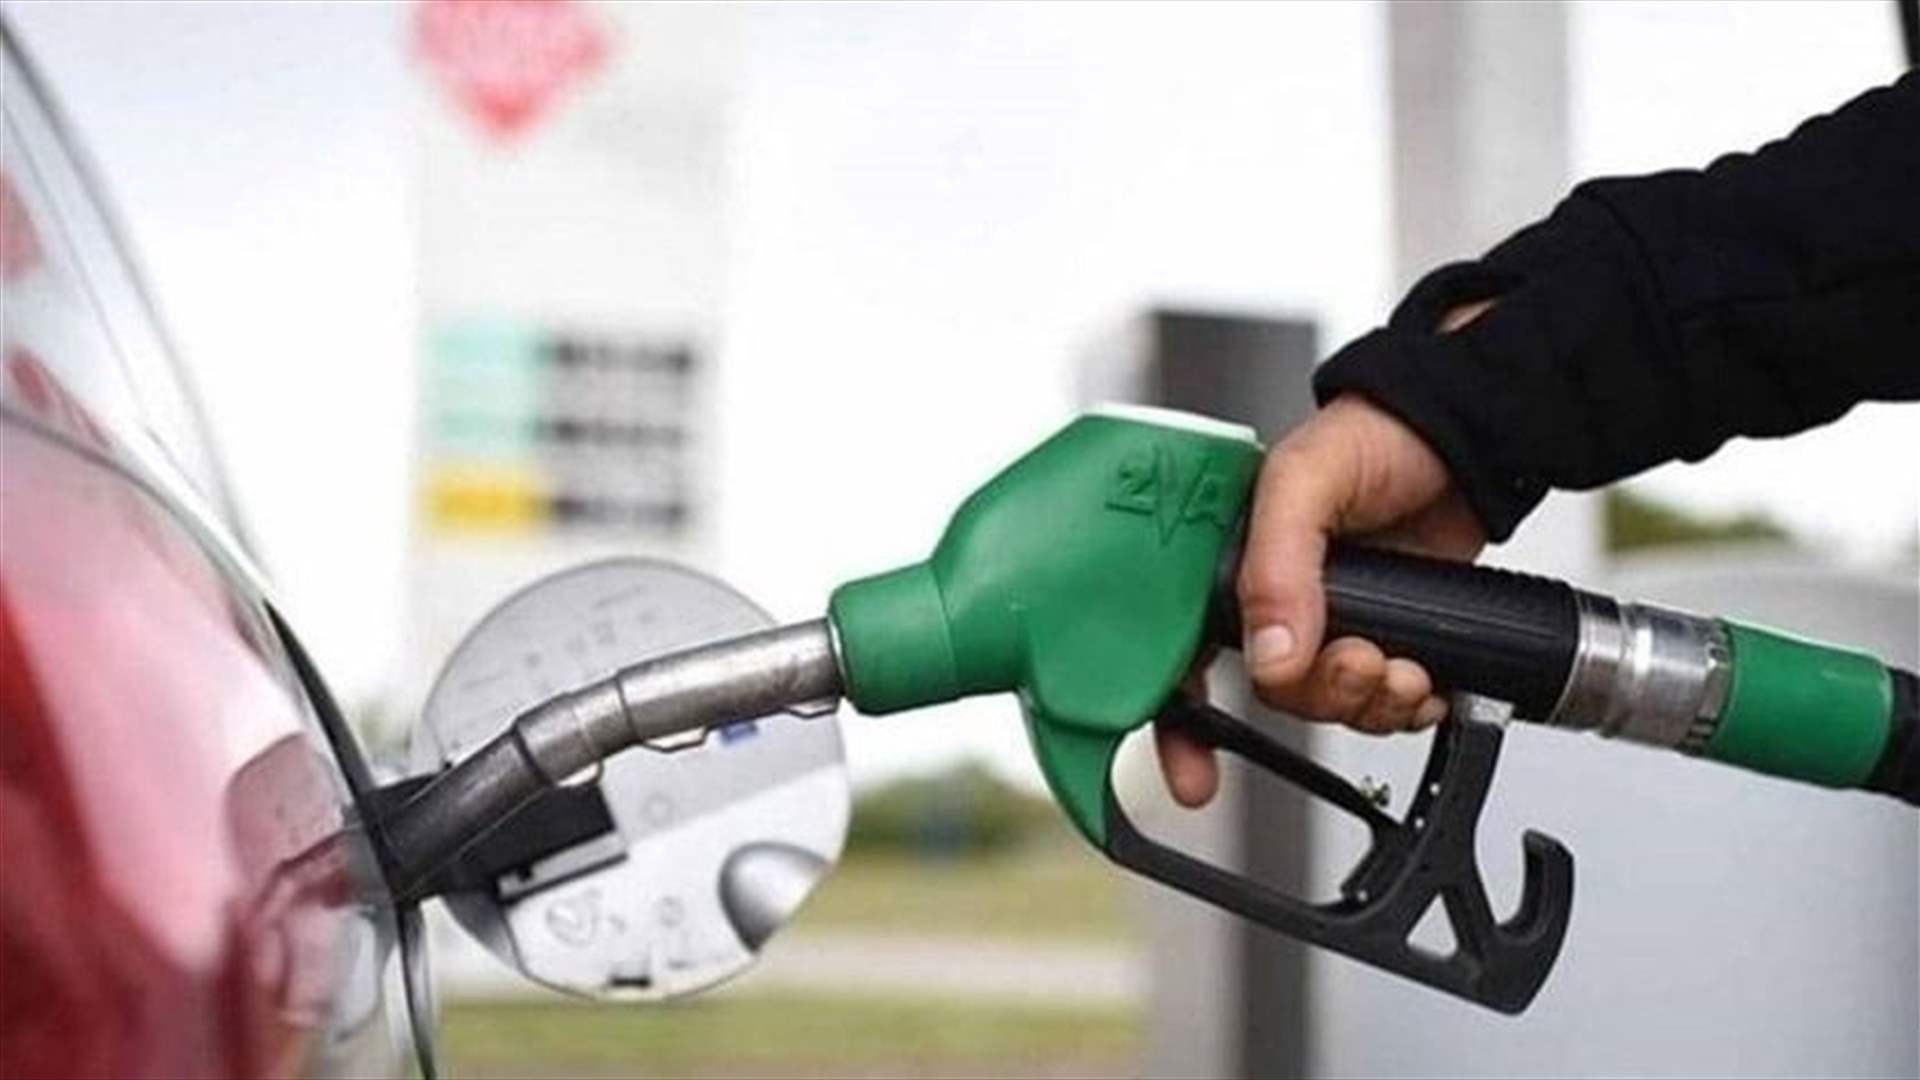 Price of 95 octane fuel drops by 25000 LBP